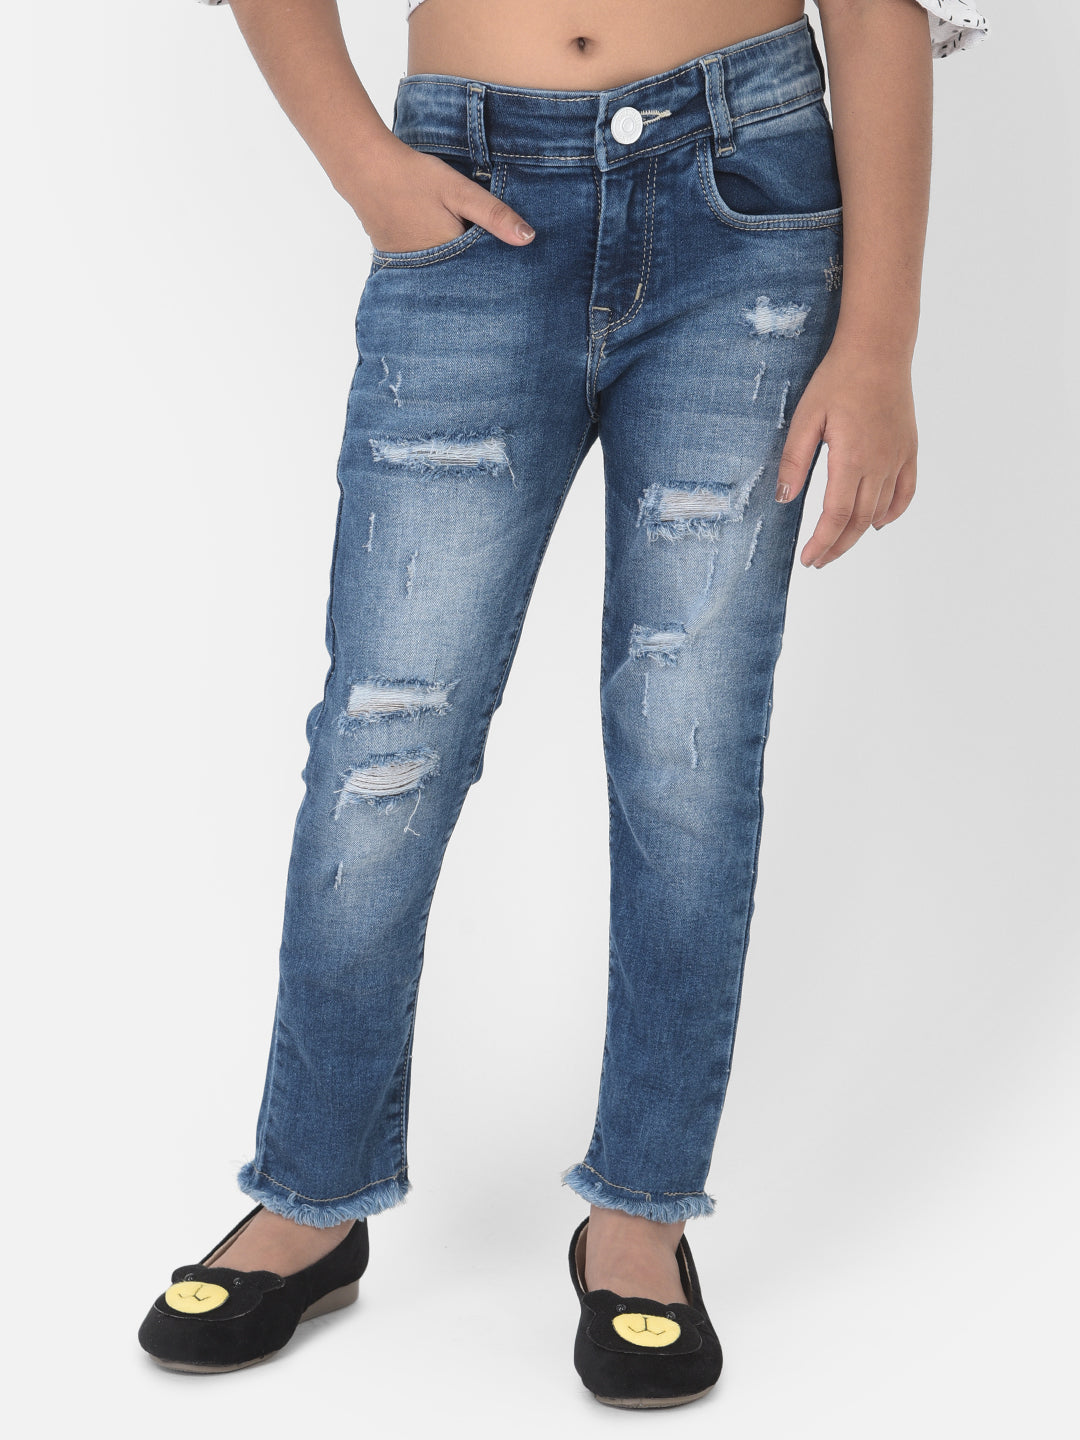 Blue Light Fade Distressed Jeans - Girls Jeans